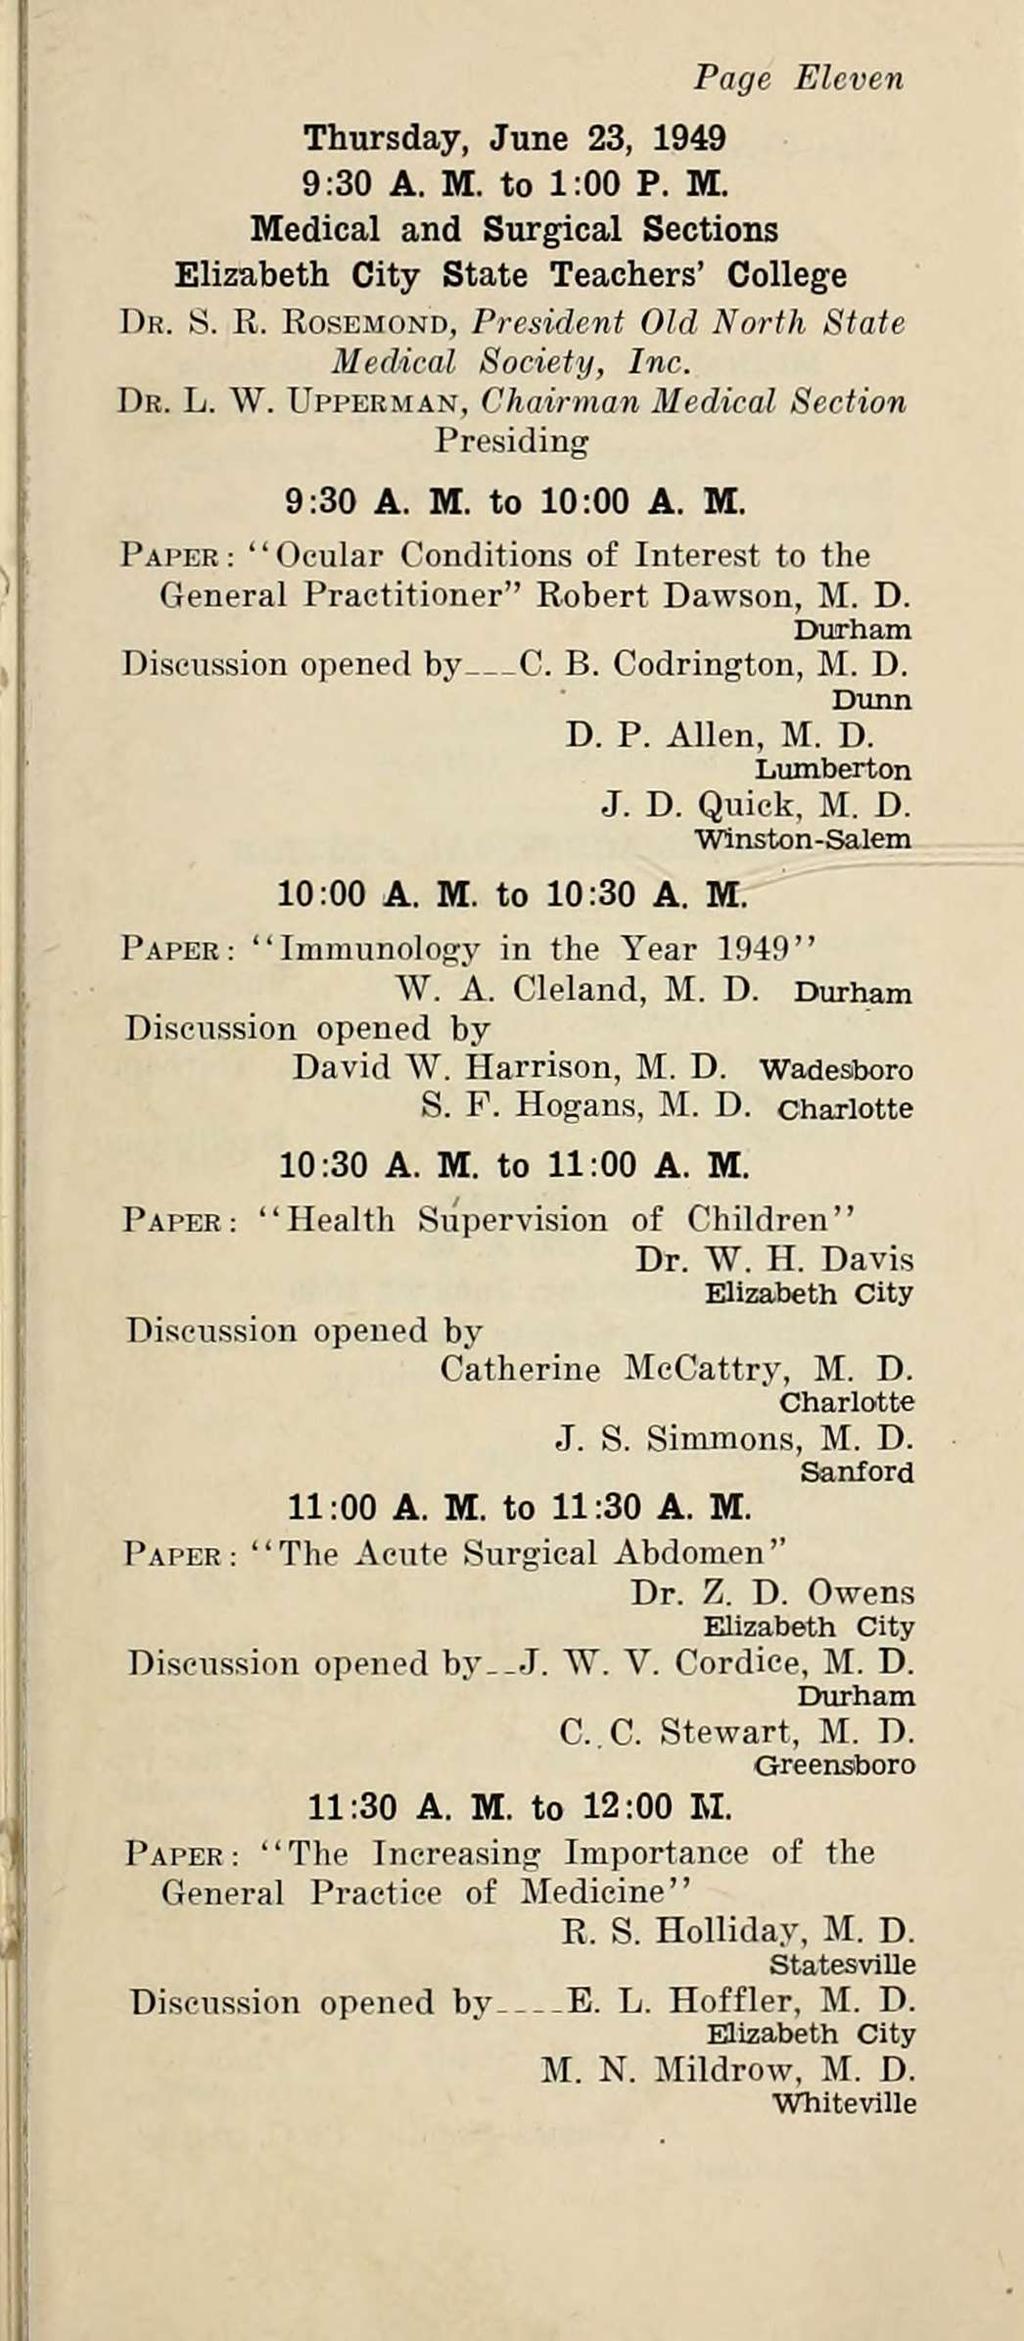 Page Thursday, June 23, 1949 9:30 A. M. to 1:00 P. M. Medical and Surgical Sections Elizabeth City State Teachers' College Eleven DR. S. R. ROSEMOND, President Old North State Medical Society^ Inc.